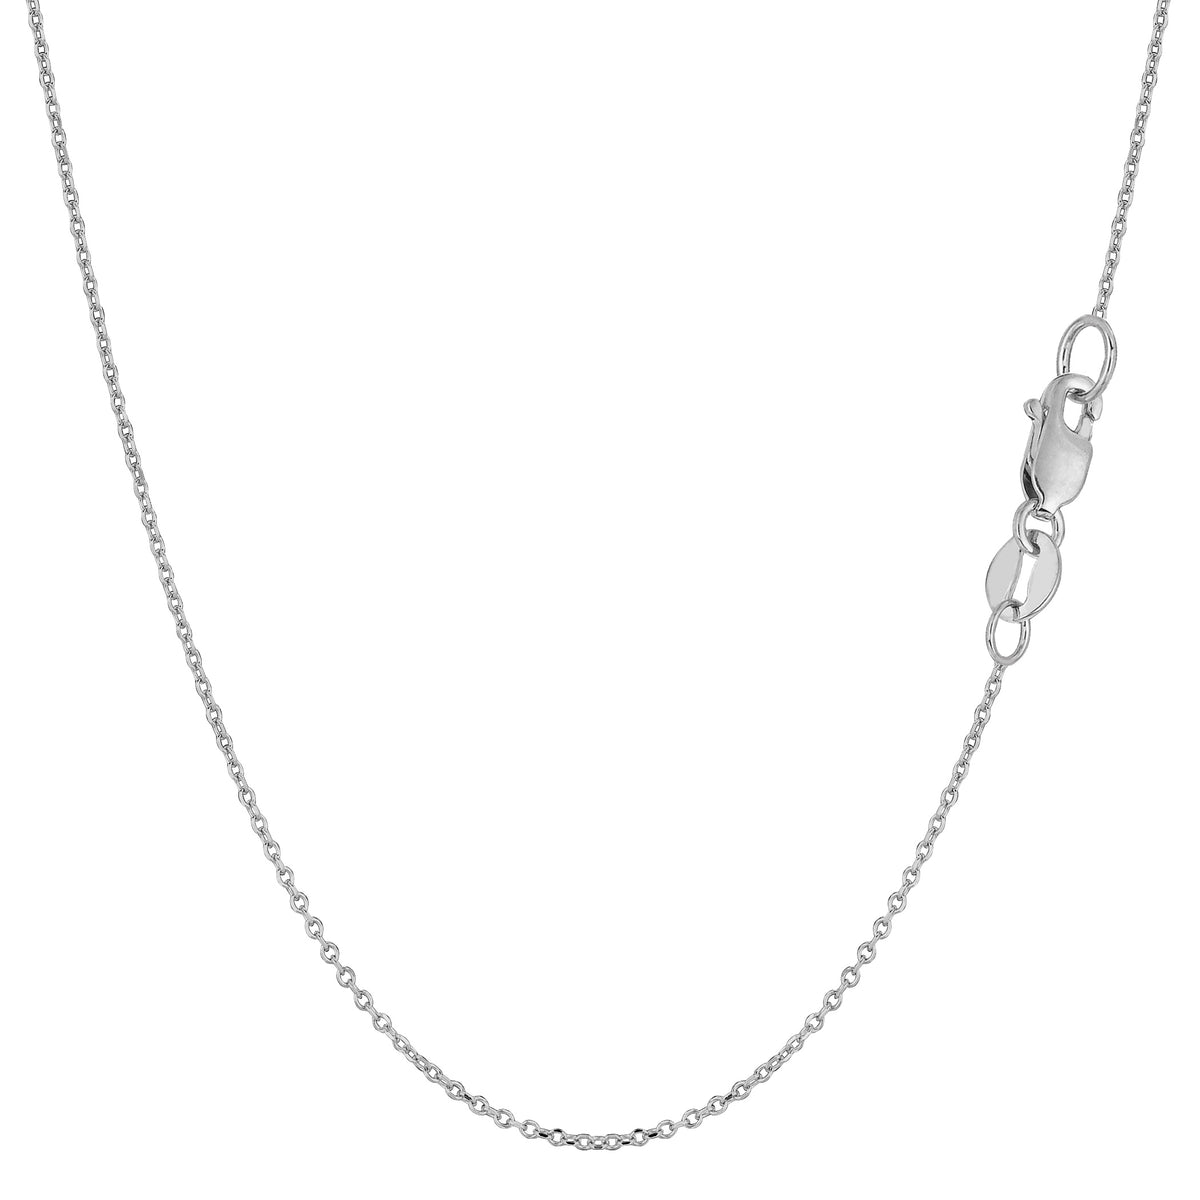 10k White Gold Cable Link Chain Necklace, 1mm, 18" fine designer jewelry for men and women